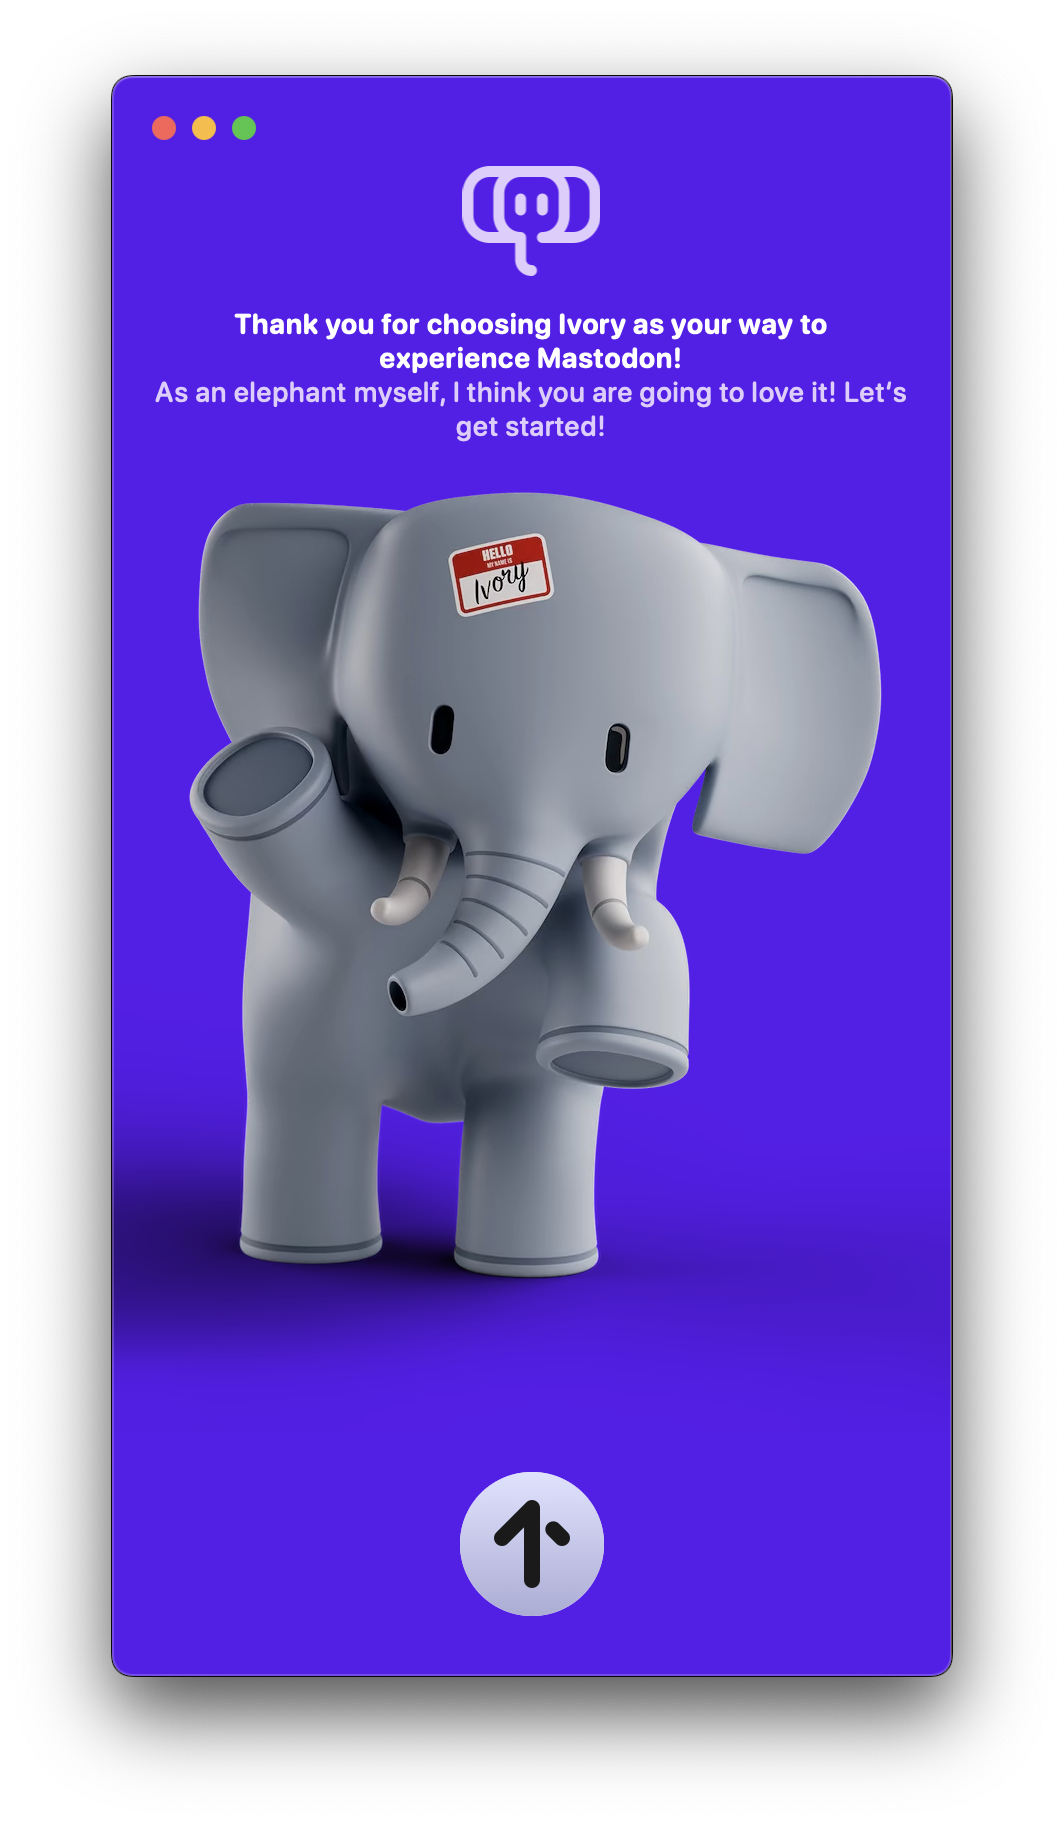 Screenshot of the Ivory welcome screen with a waving elephant